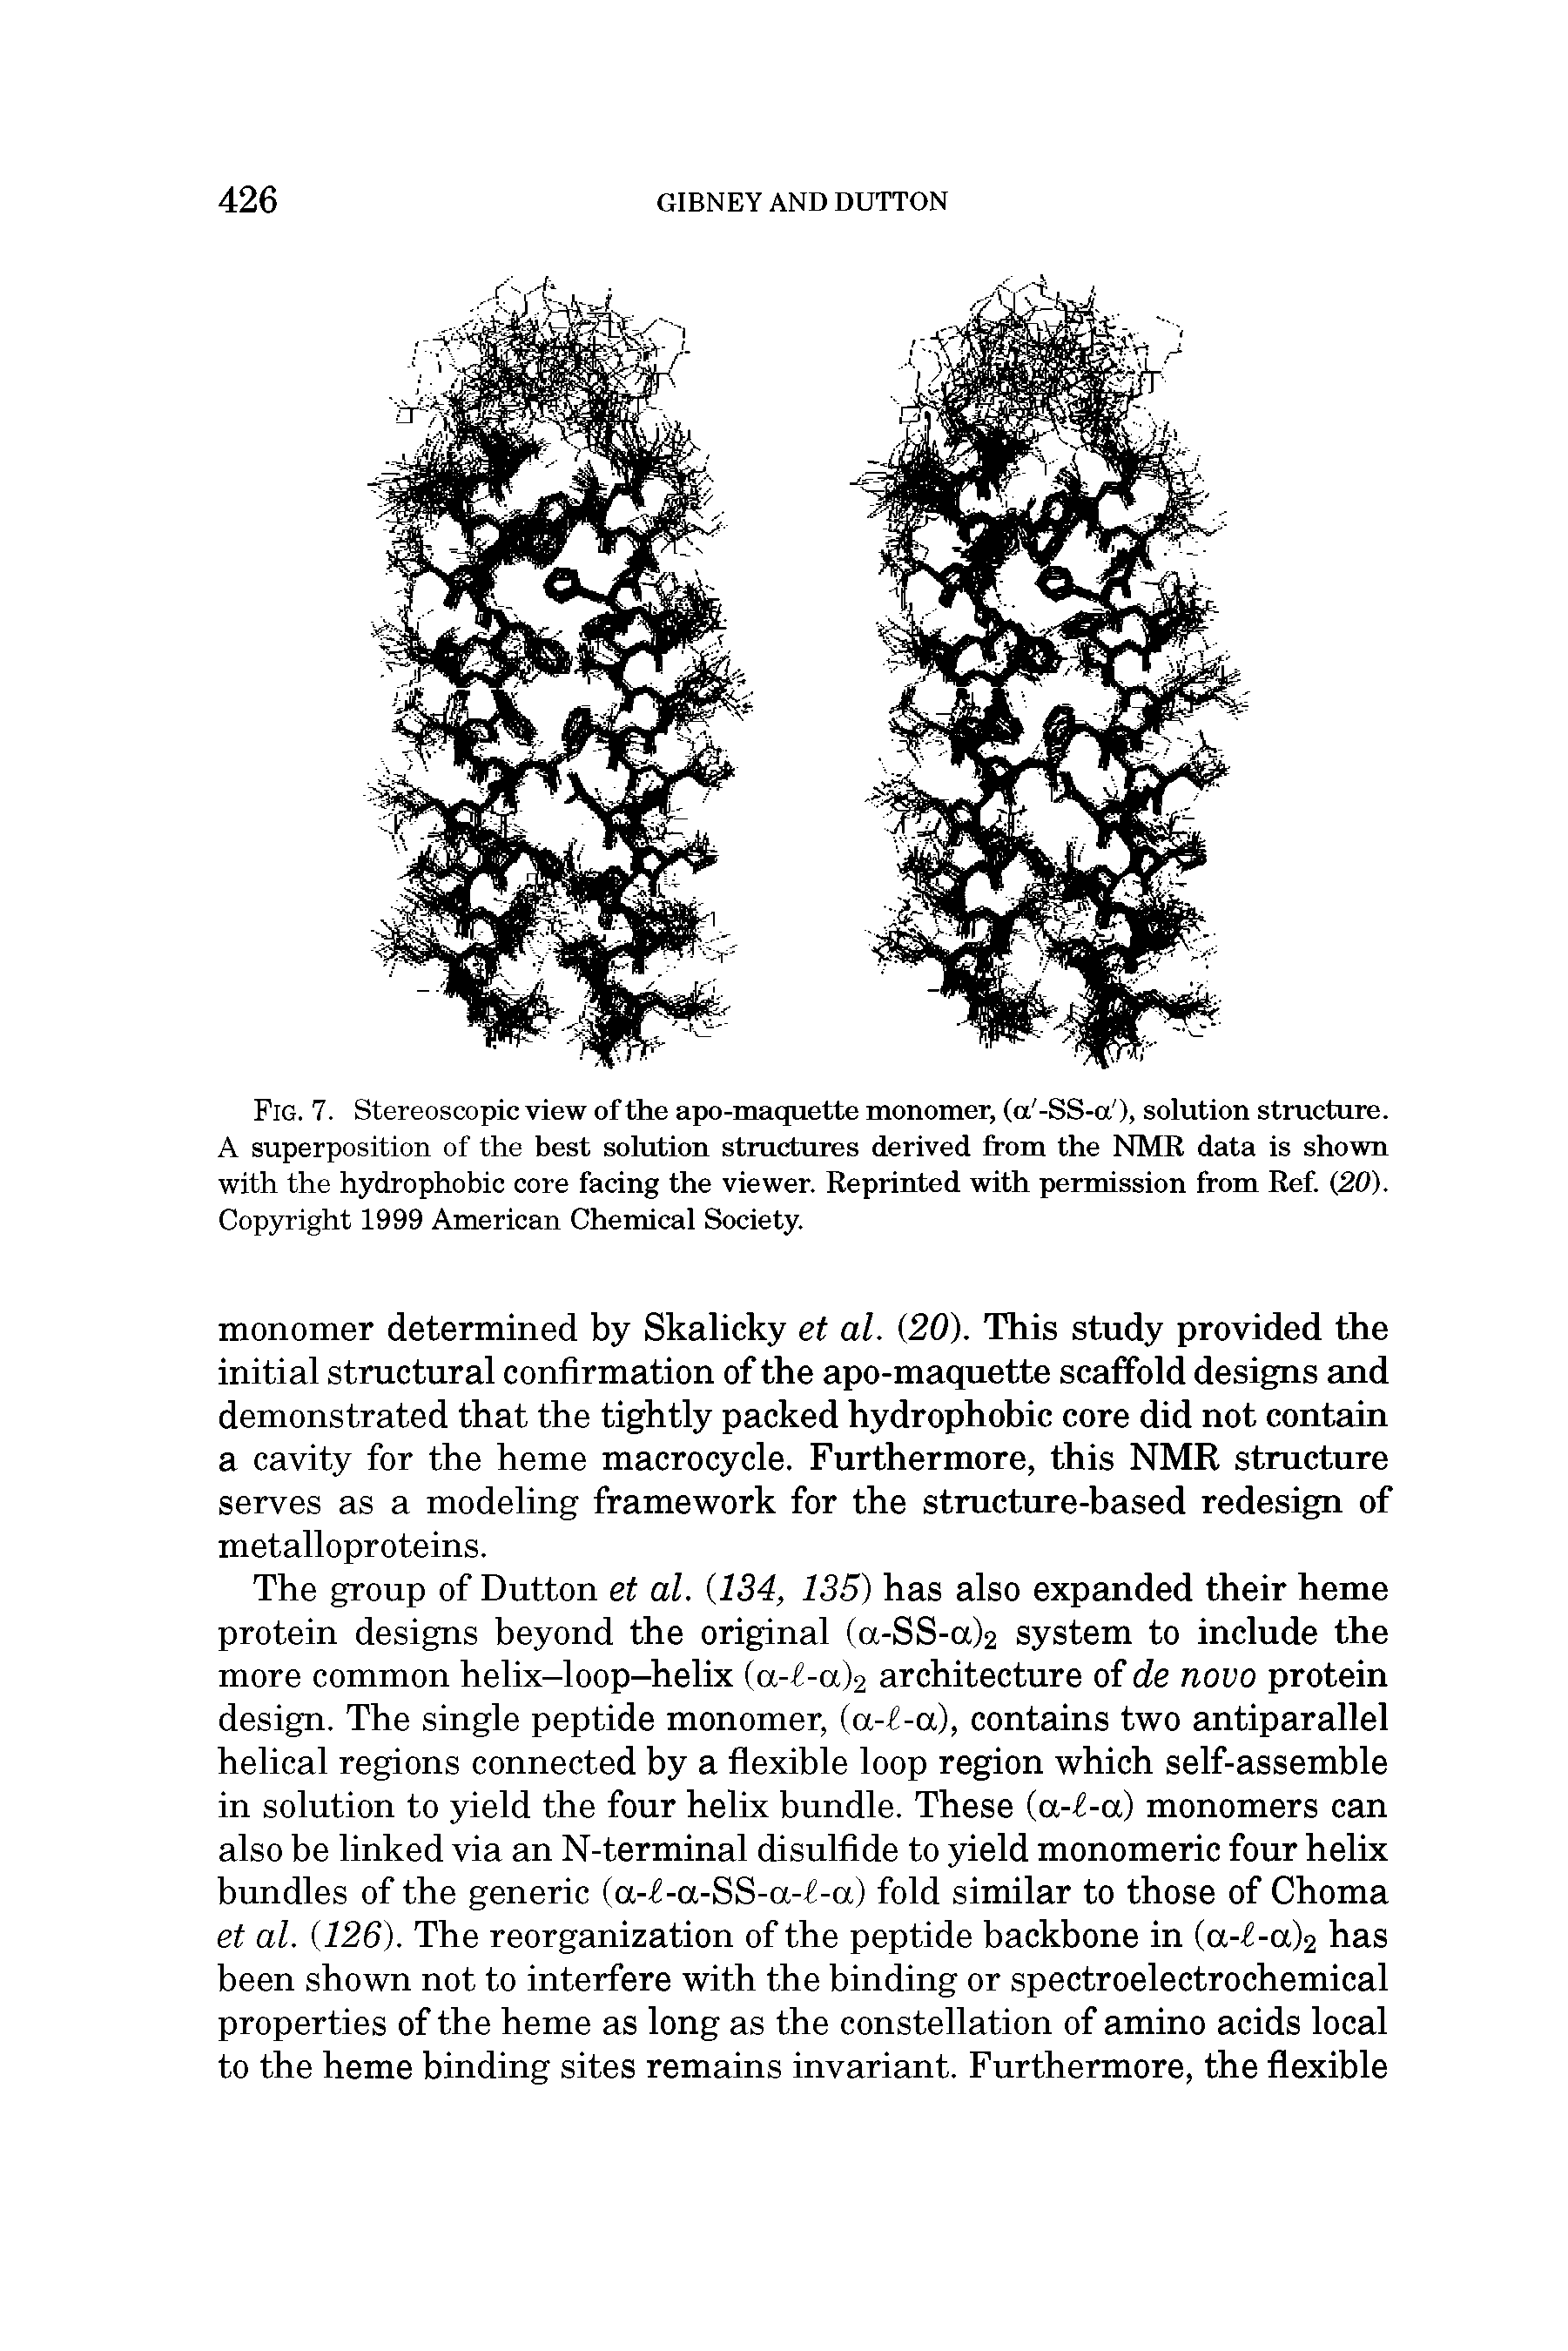 Fig. 7. Stereoscopic view of the apo-maquette monomer, (a -SS-a ), solution structure. A superposition of the best solution structures derived from the NMR data is shown with the hydrophobic core facing the viewer. Reprinted with permission from Ref (20). Copyright 1999 American Chemical Society.